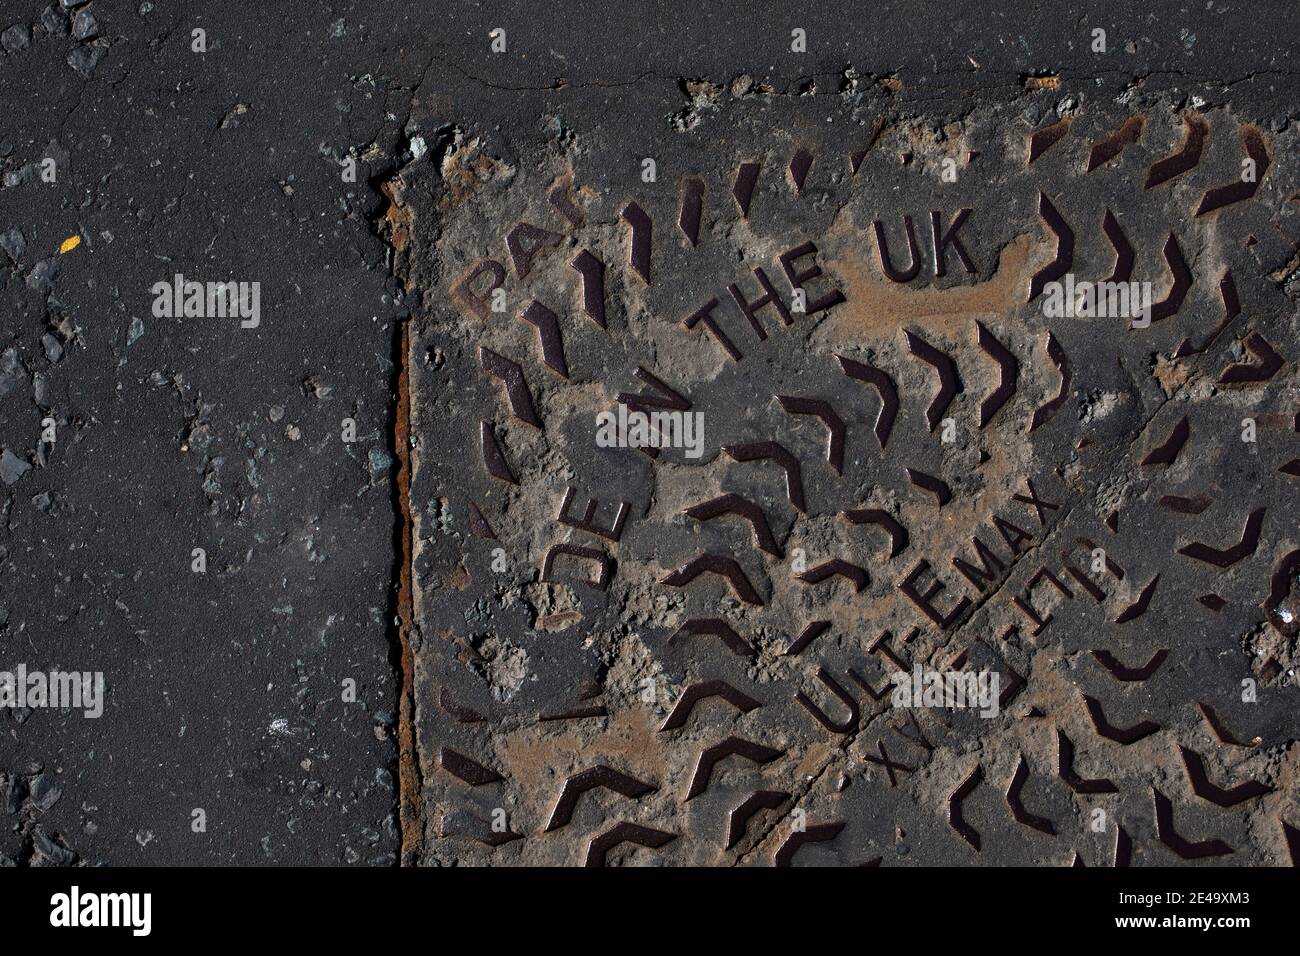 A man hole pictured on a street in Wirral, England. Stock Photo